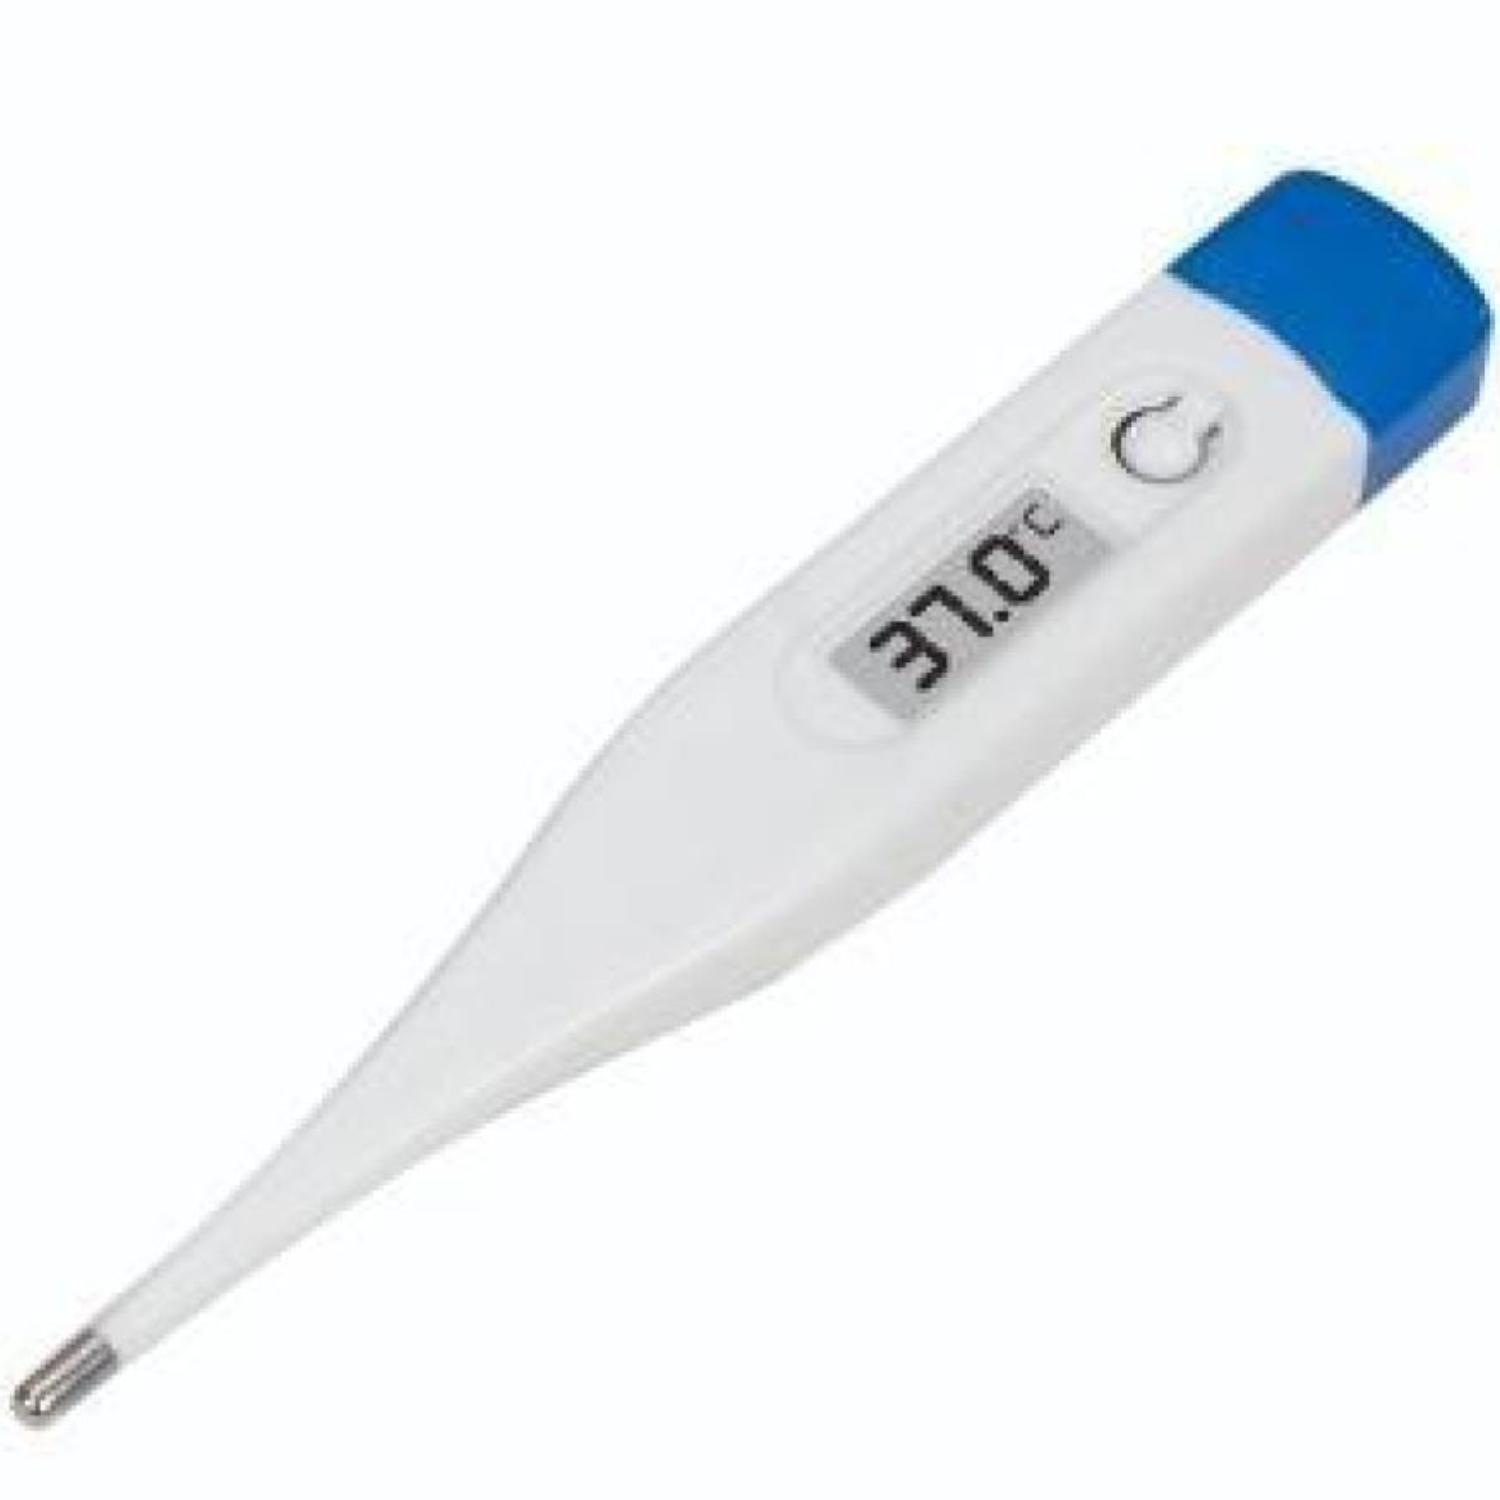 Digitales Thermometer - Allteq